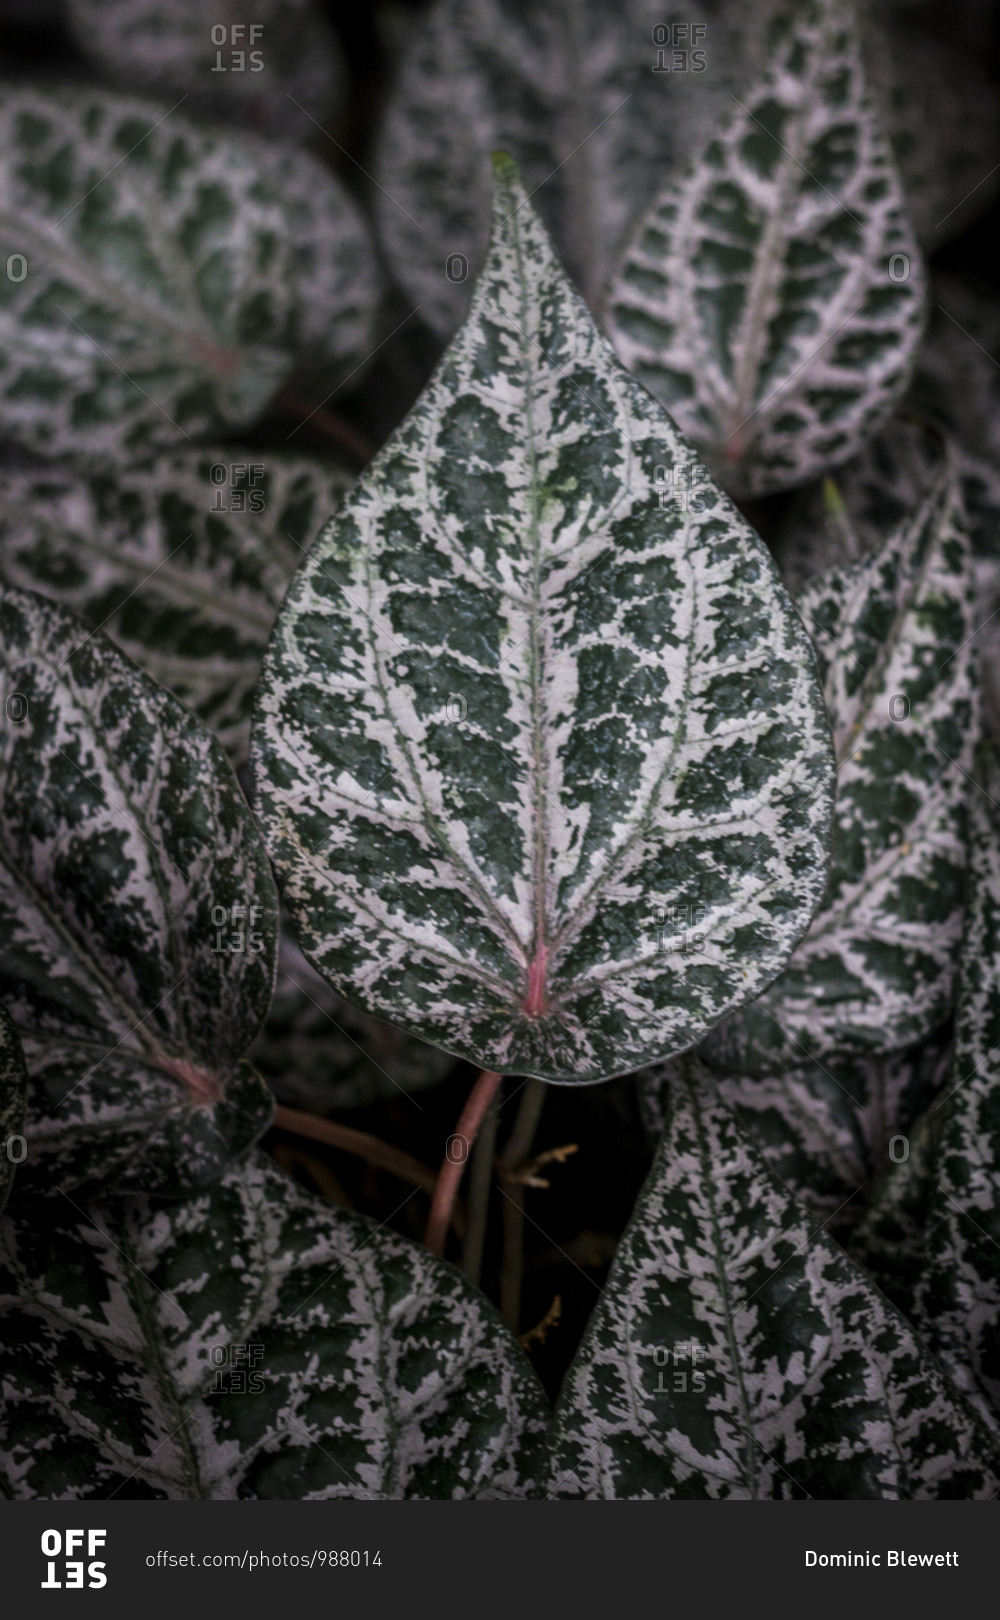 Green patterned leaves of a polka dot plant (Hypoestes phyllostachya) at the Botanical Gardens in Berlin, Germany